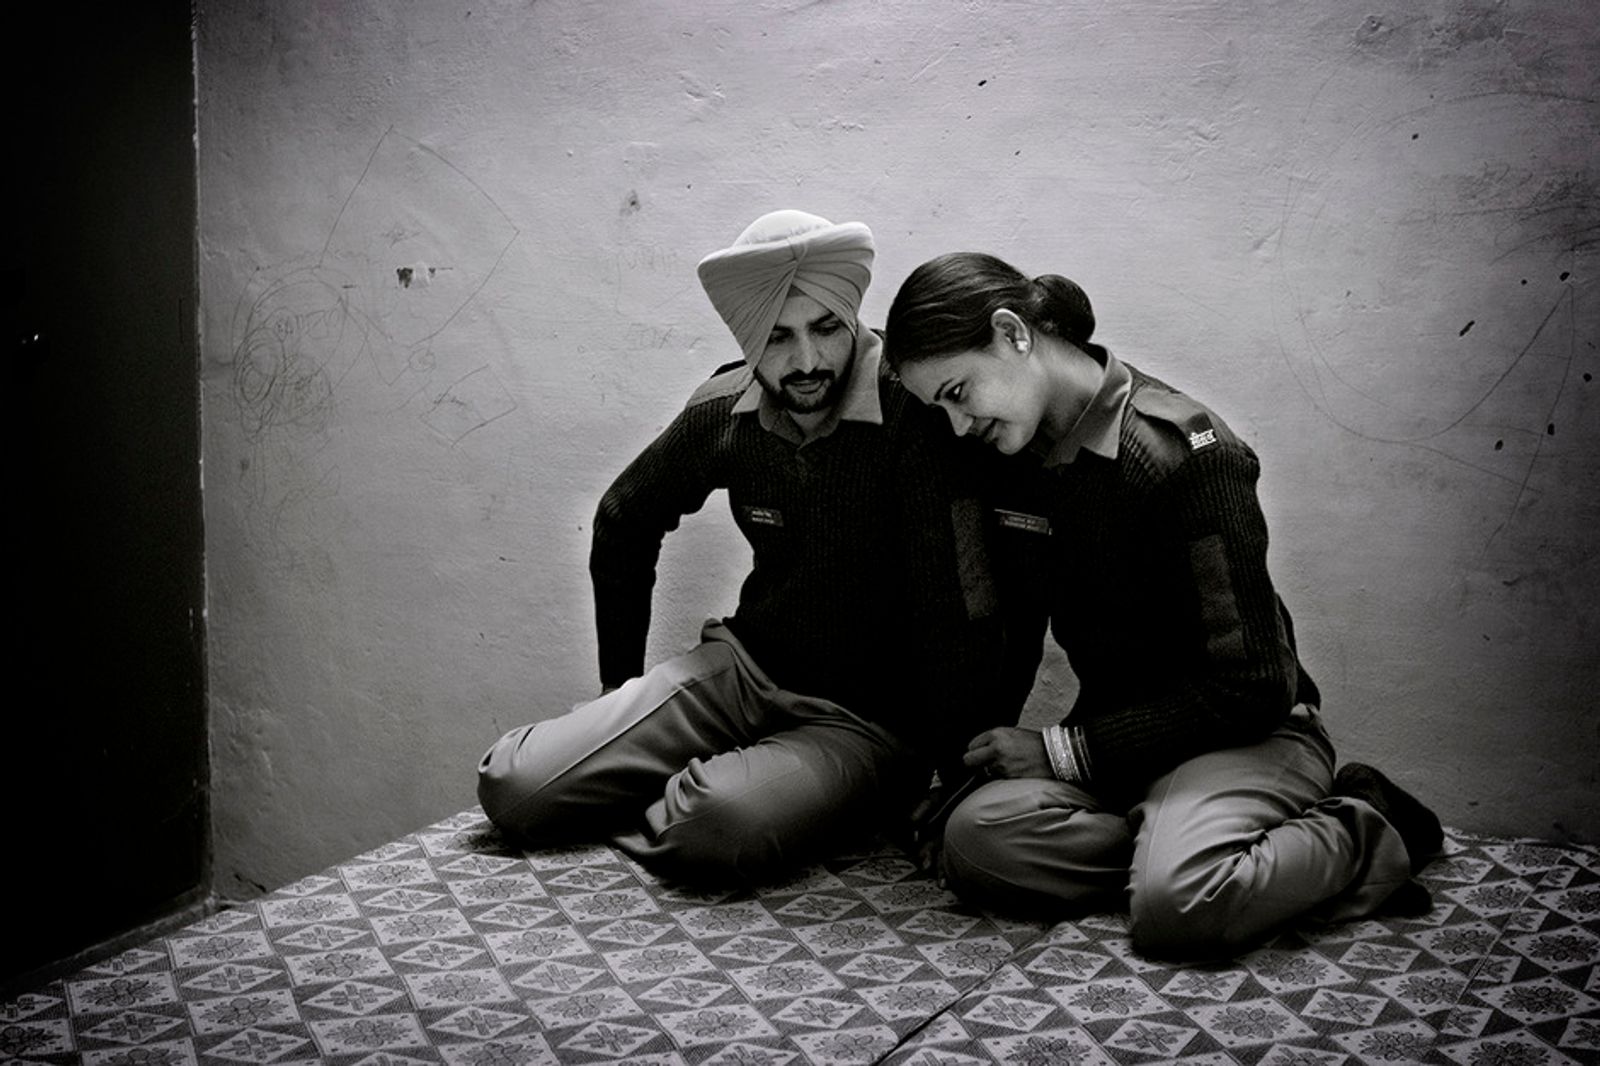 © Poulomi Basu - A newly married couple. They fell in love in the border. They meet twice a month in a small room. Fatehpur 2013